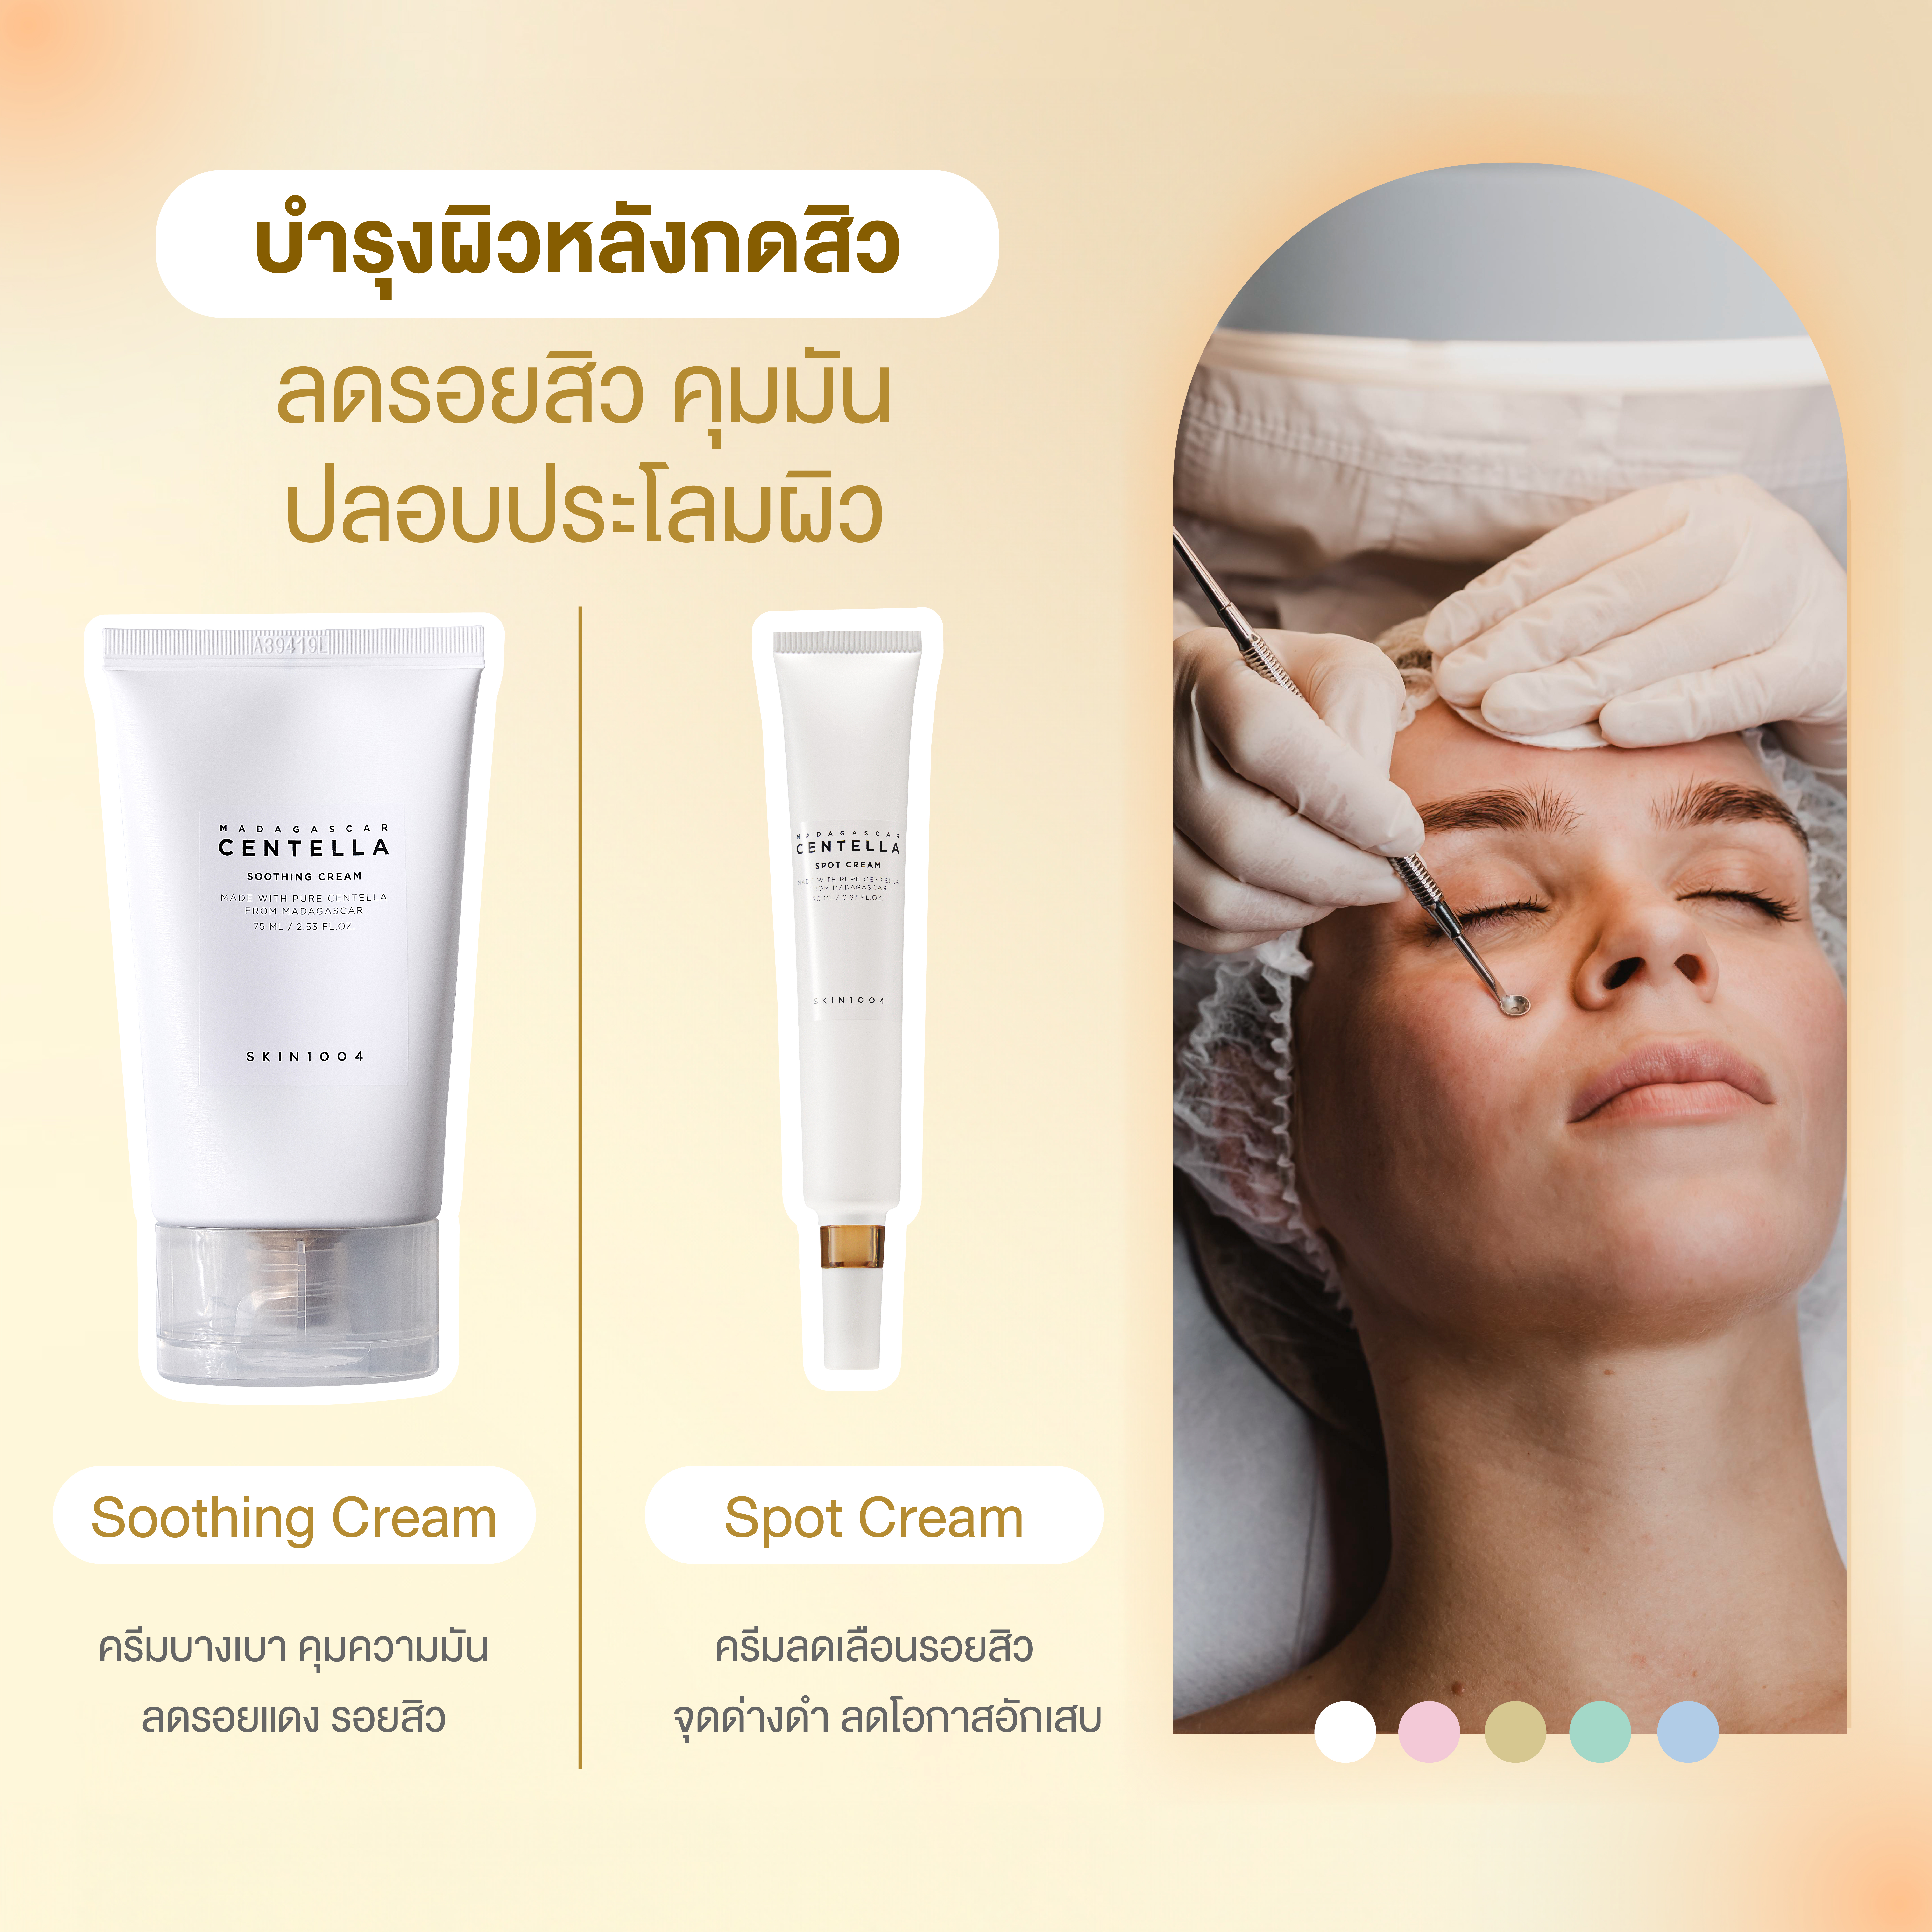 SKIN1004 - All Items for Facial Treatment - Clinic -3